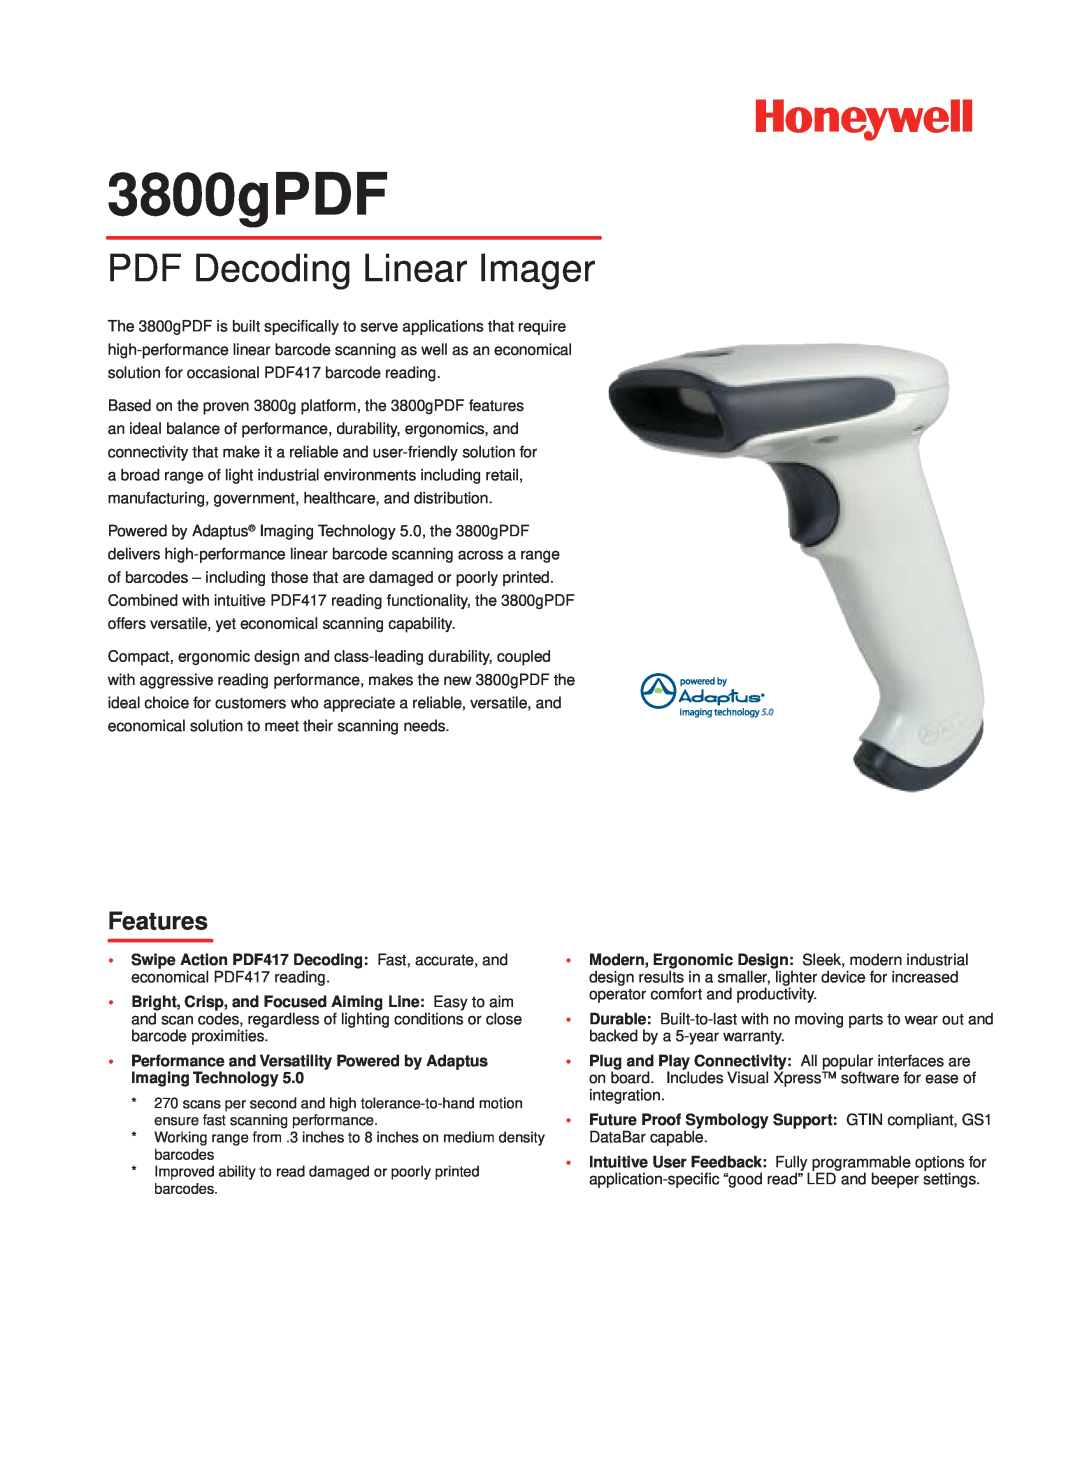 Hand Held Products 3800gPDF warranty PDF Decoding Linear Imager, Features 